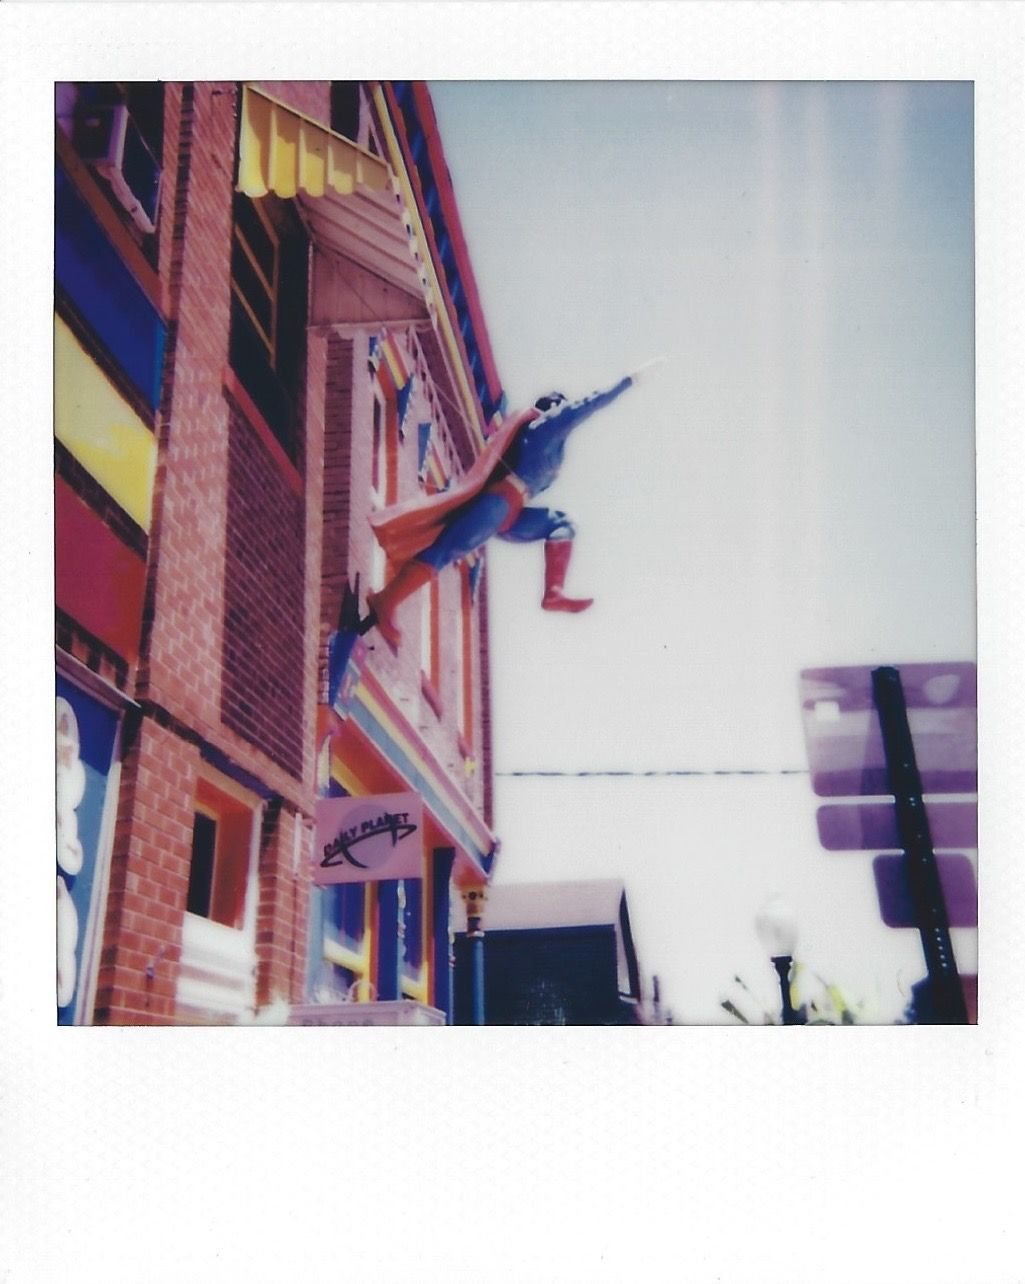 A polaroid photo of the Superman status leaping off the side of the Super Museum